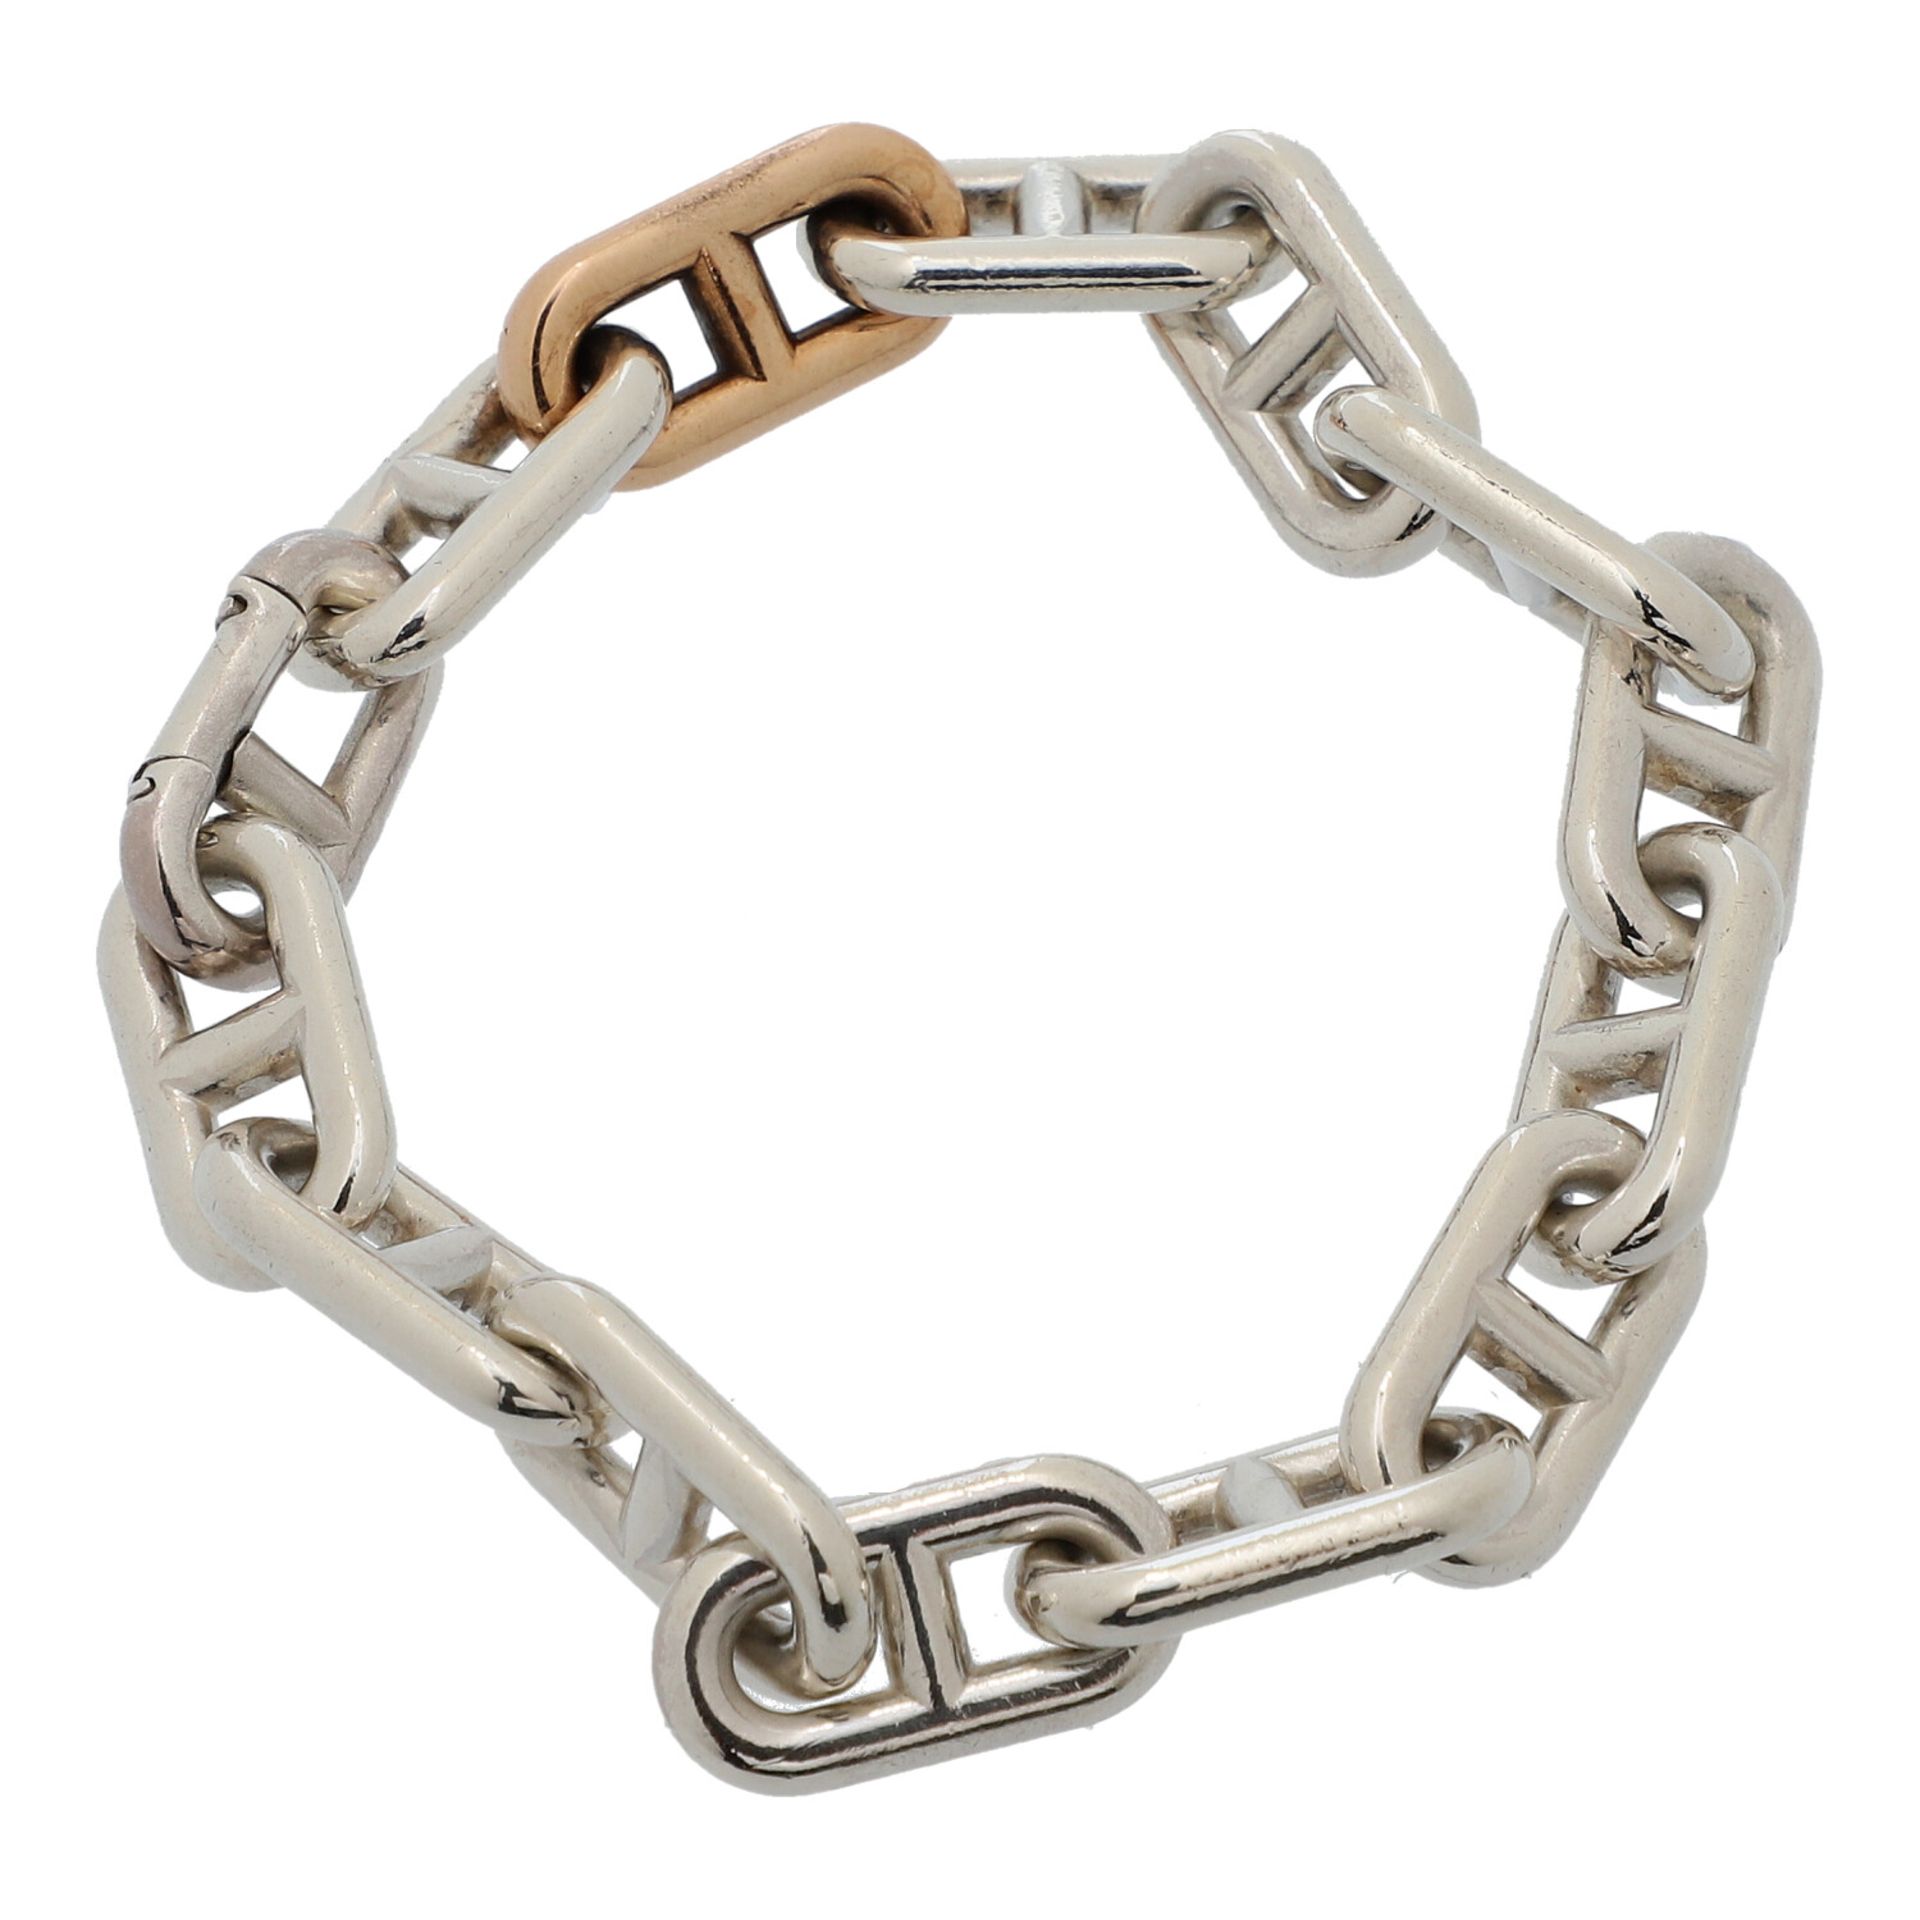 HERMÈS Armband "CHAINE D´ANCRE", - Image 2 of 3